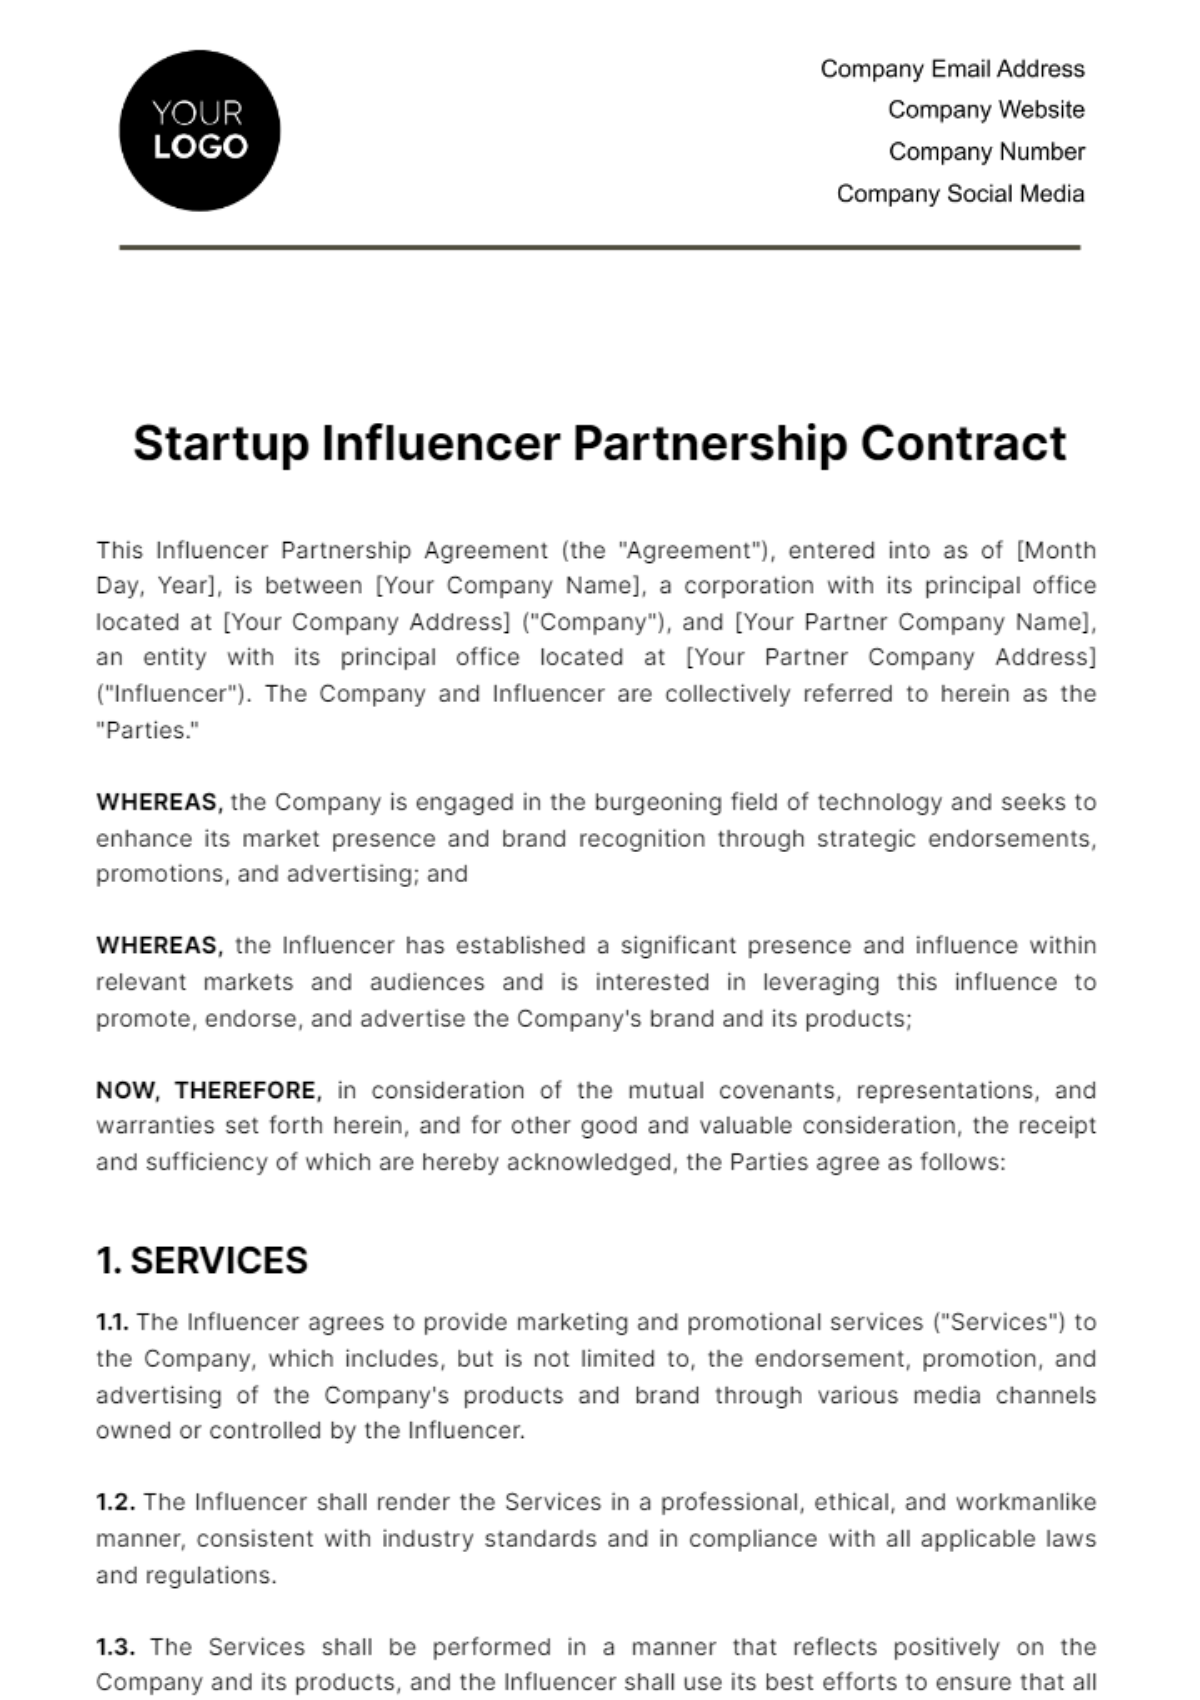 Free Startup Influencer Partnership Contract Template